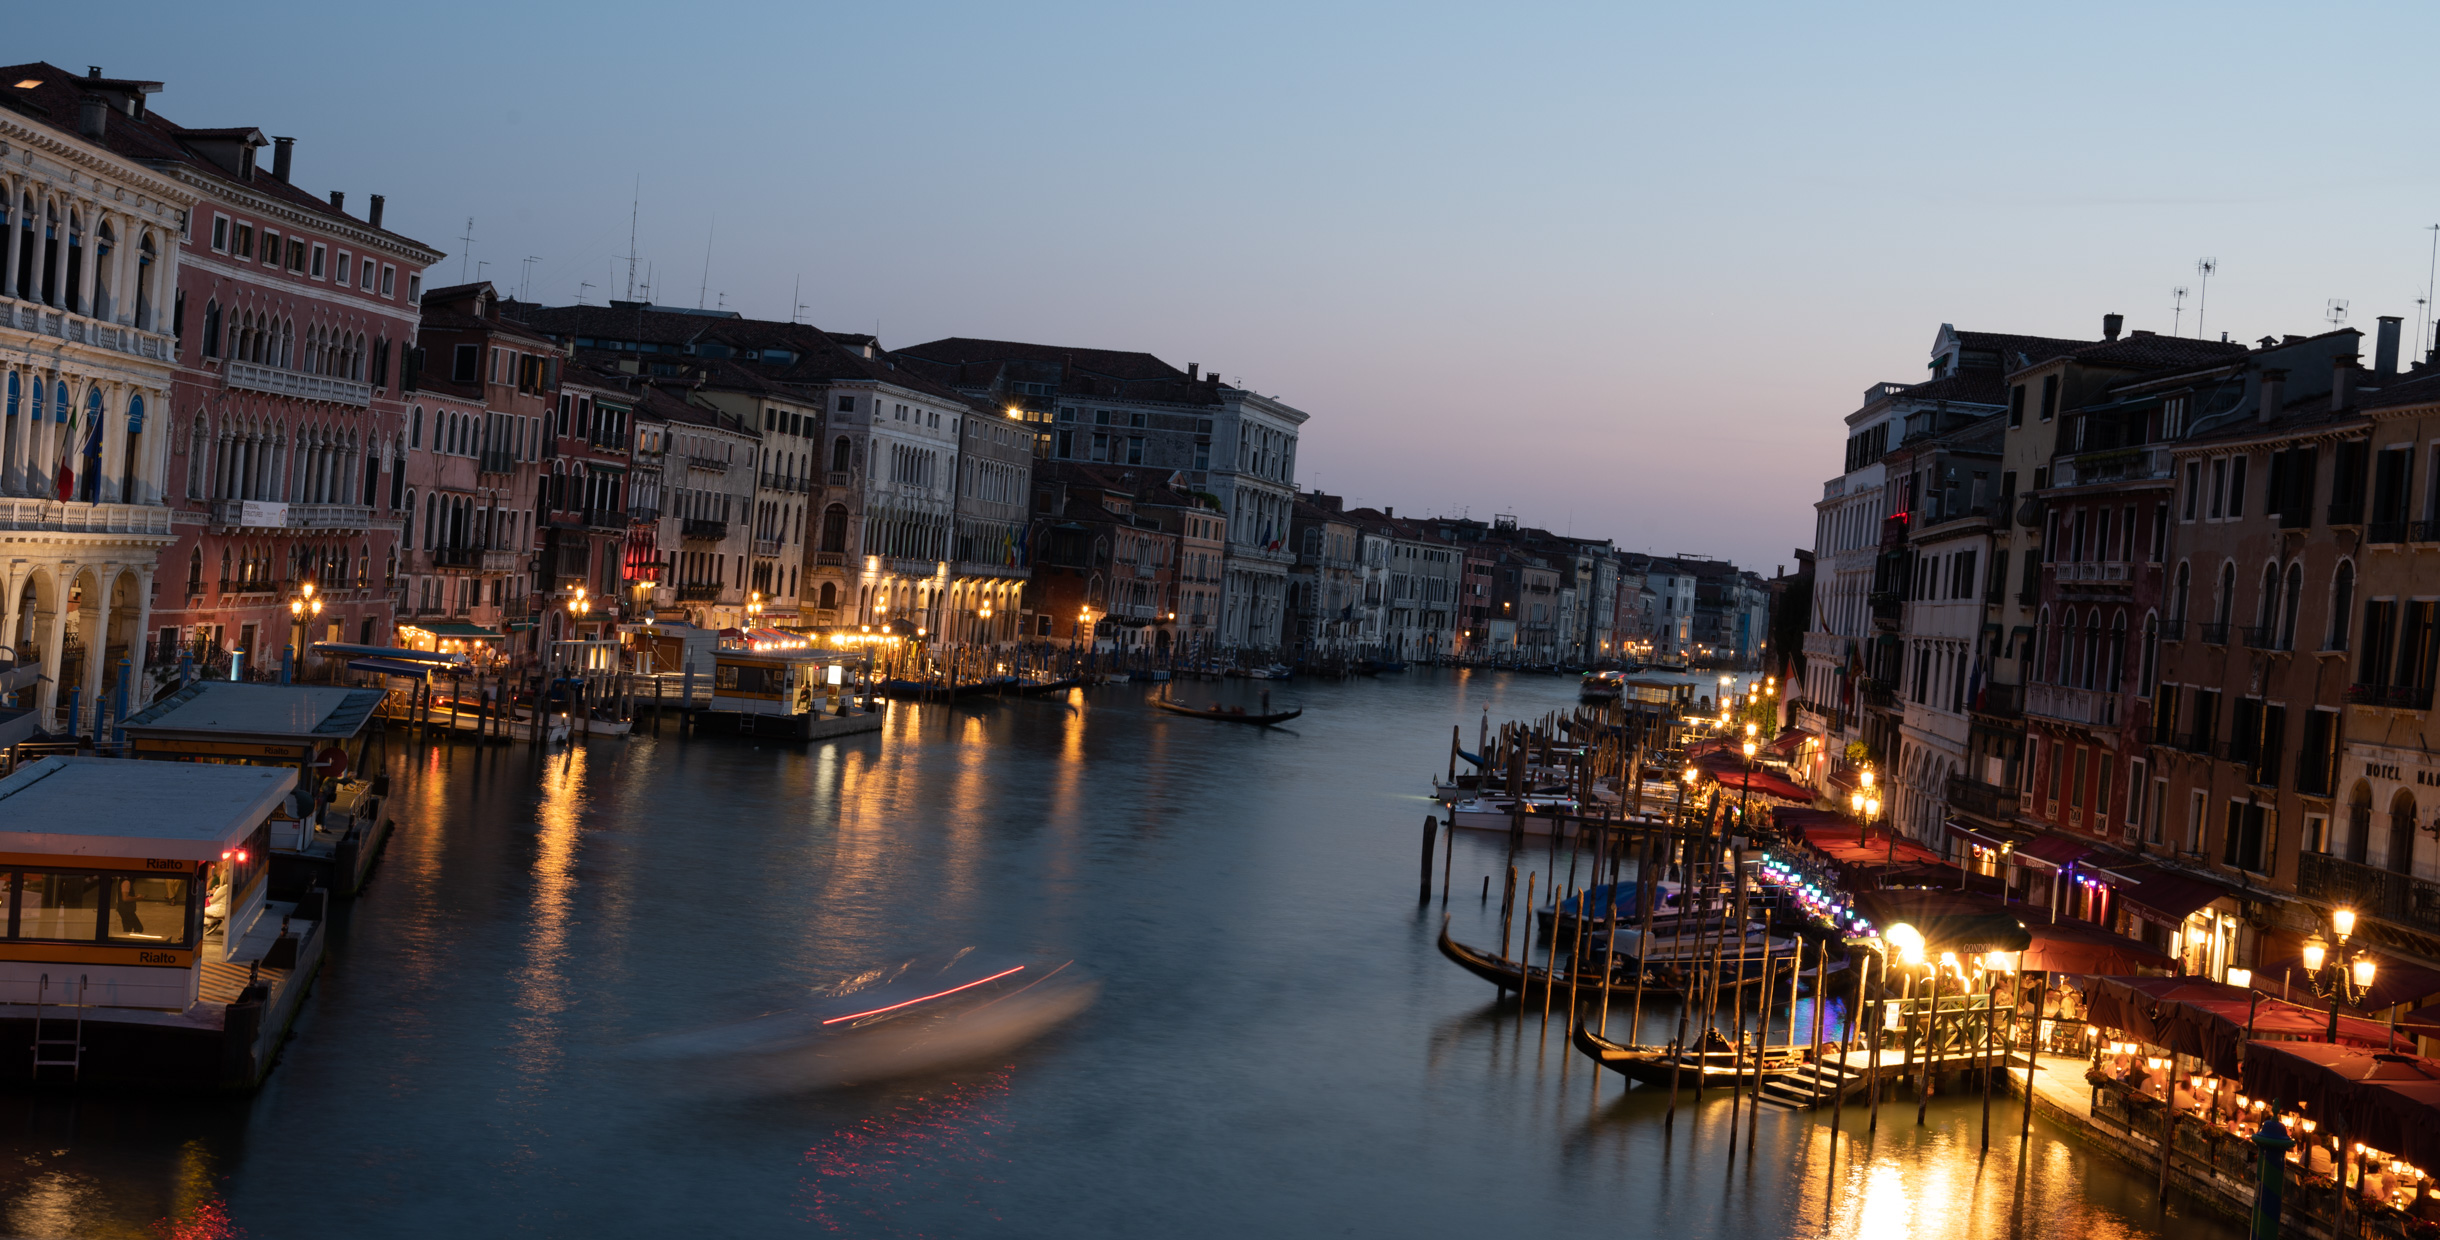 Venice – Iconic tourist spots in the evening